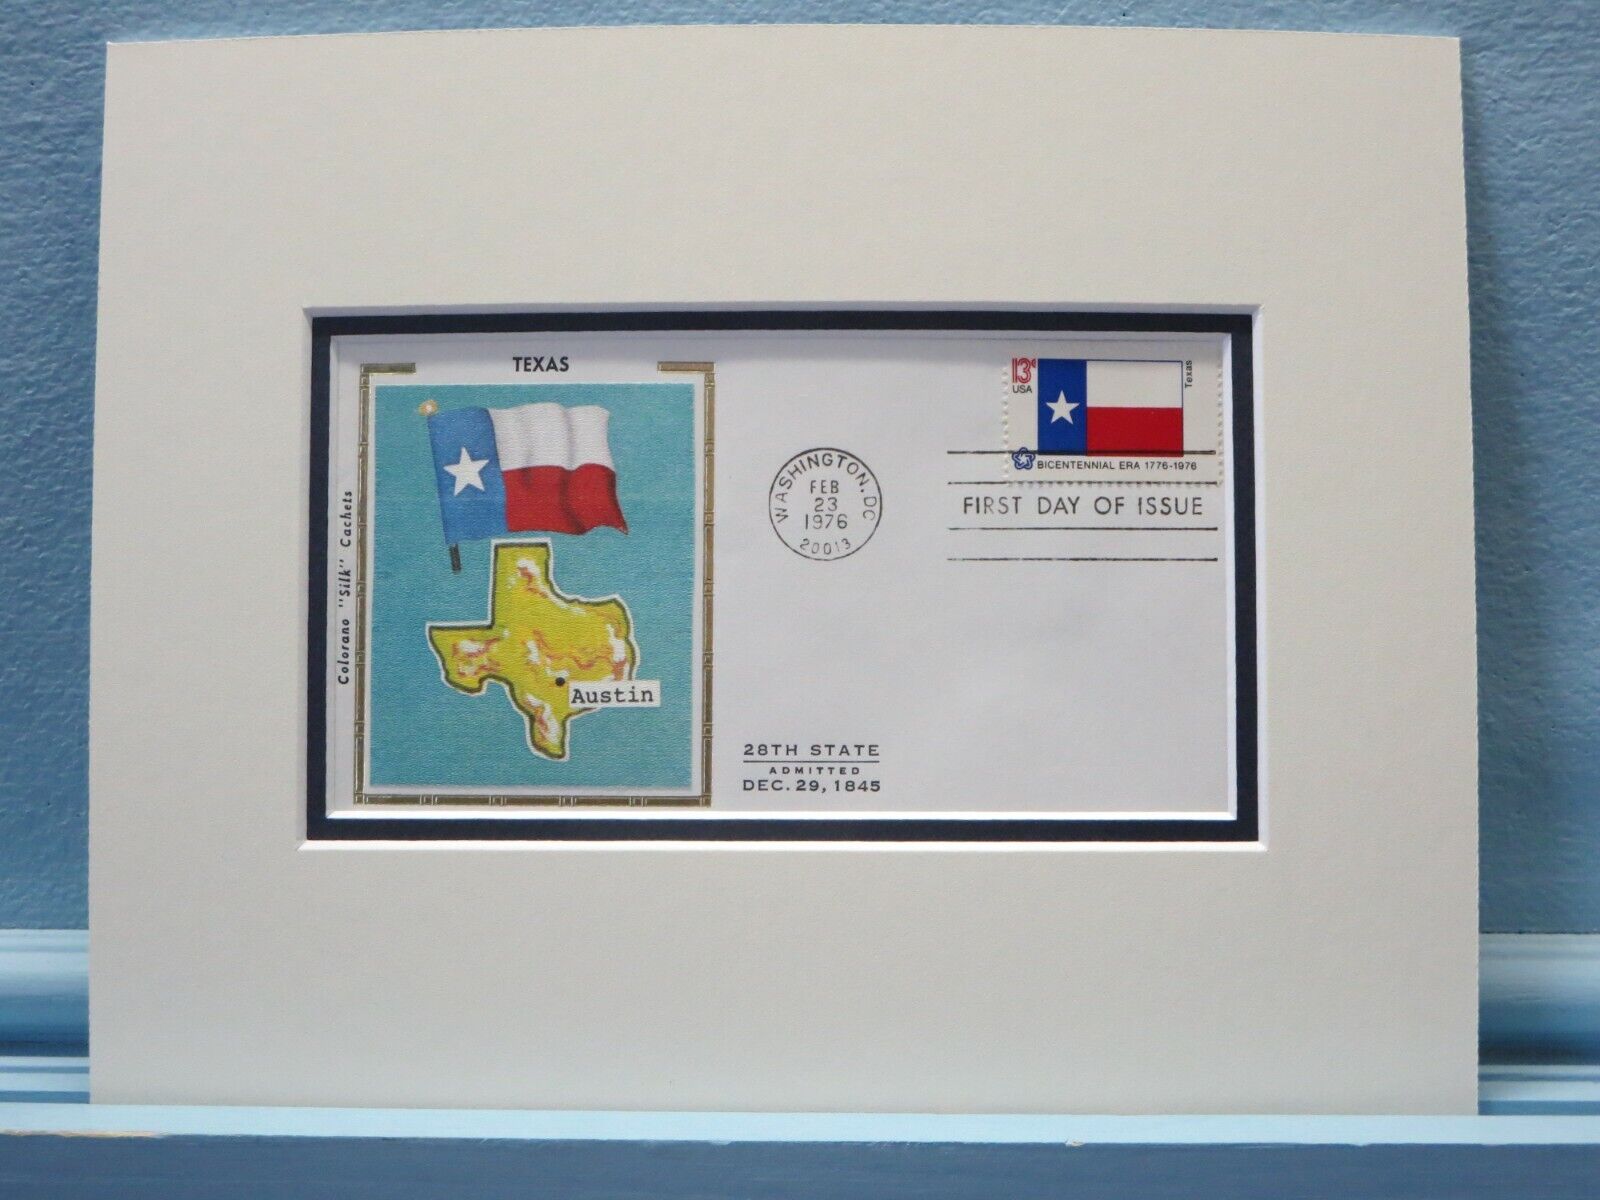 Texas Joins the Union  as the 28th state & First Day Cover of Texas Statehood 